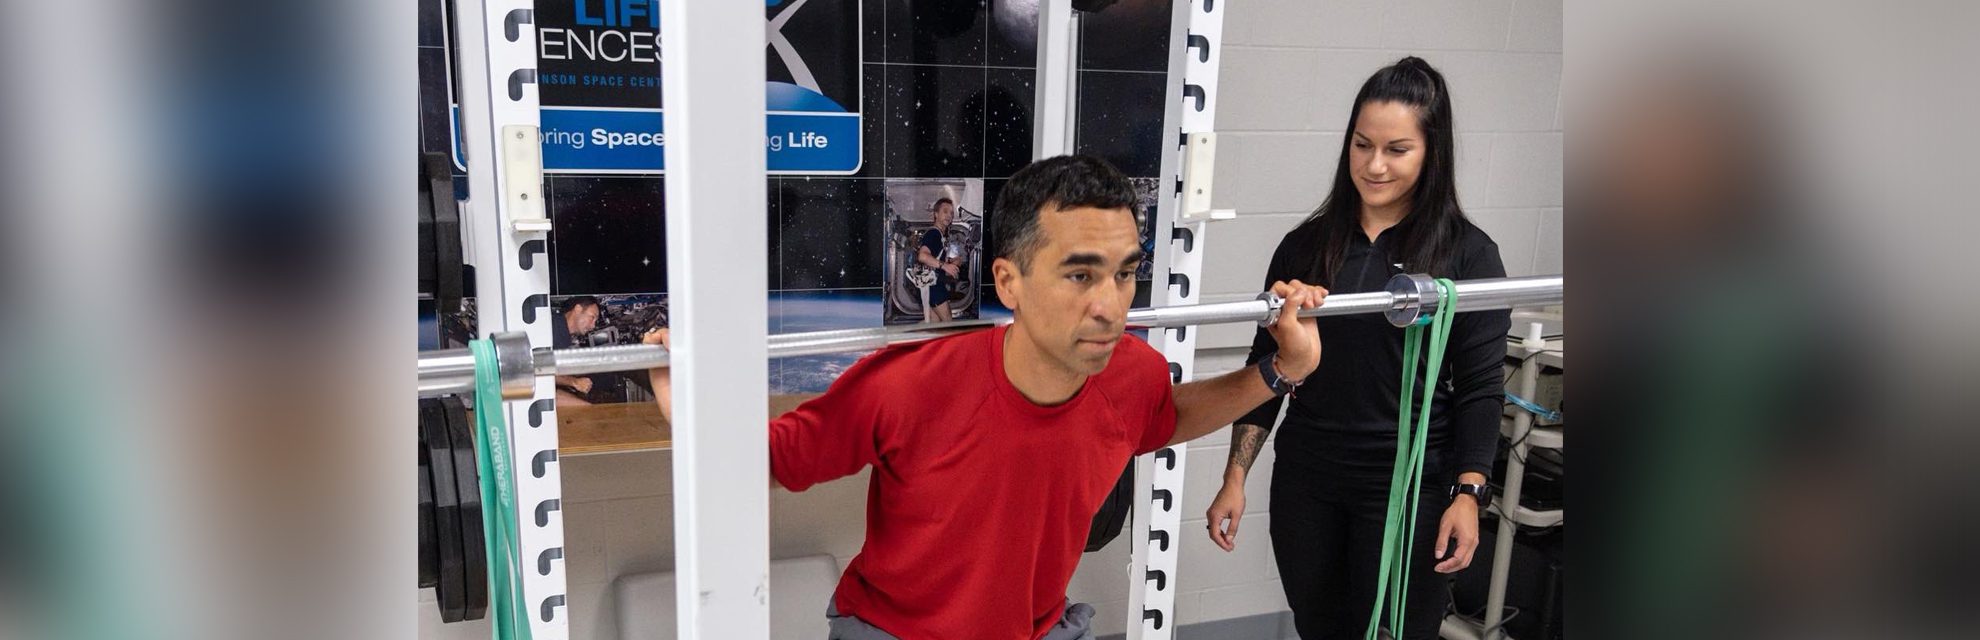 NASA Astronaut Raja Chari, who was docked at the International Space Station for six months, shared images of training under supervision after returning to Earth. The astronaut had earlier shared an image of his spine, which got slightly bent due to his outer space stay.